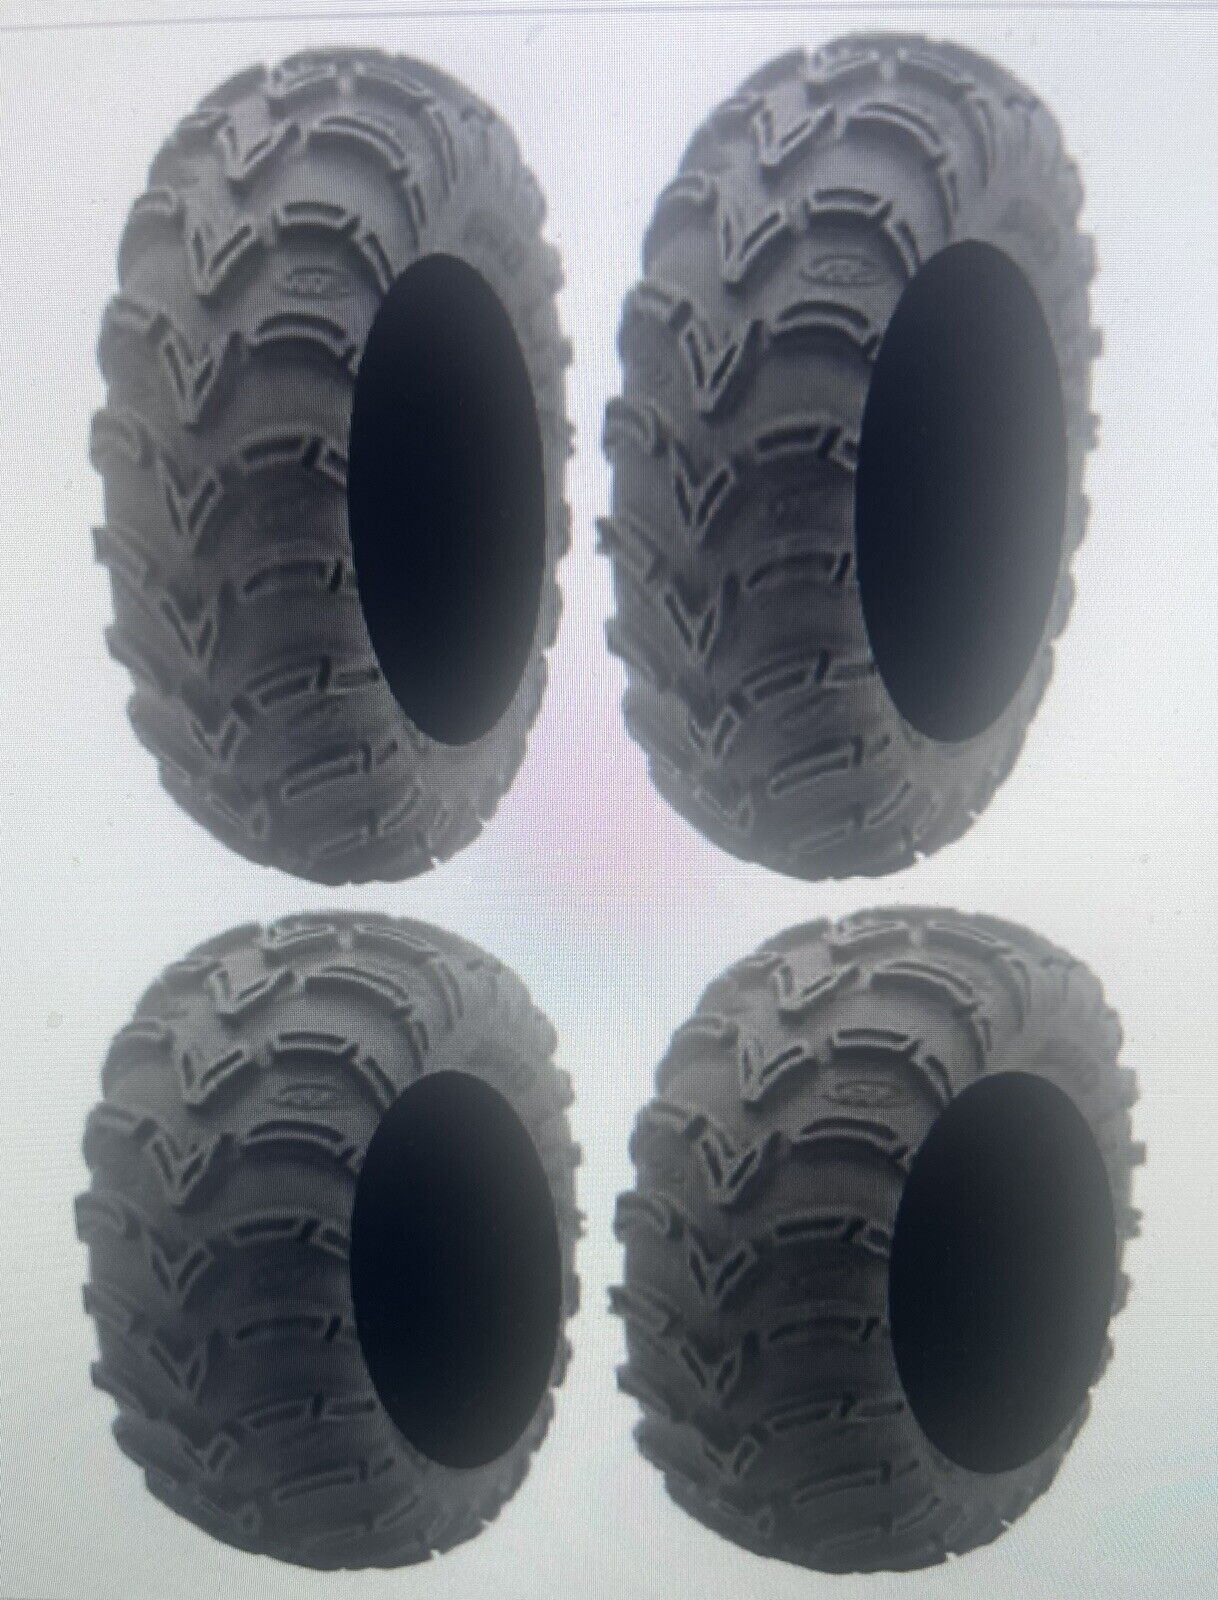 Full set of ITP Mud Lite (6ply) 25x8-12 and 25x10-12 ATV Tires (4)